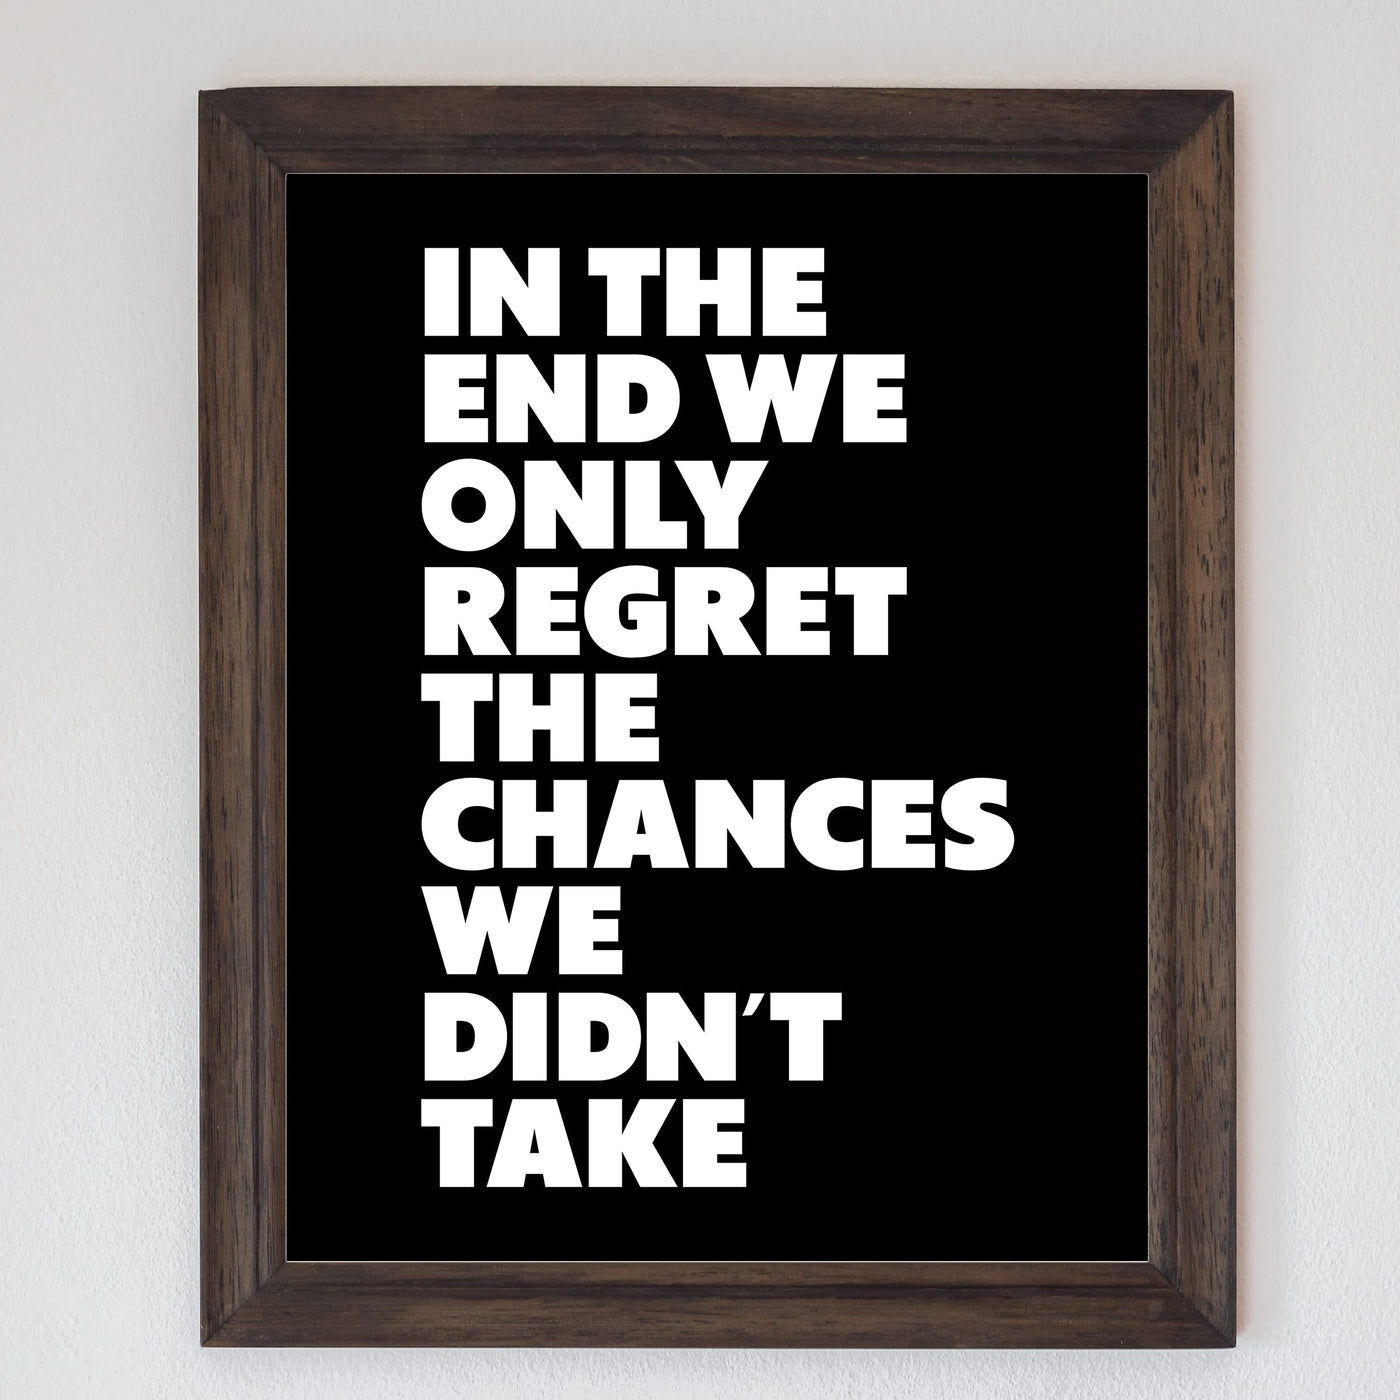 In the End, Only Regret Chances We Didn't Take Motivational Quotes Wall Sign-8 x 10" Inspirational Art Print-Ready to Frame. Modern Decor for Home-Office-Desk-School-Gym. Great Gift of Motivation!